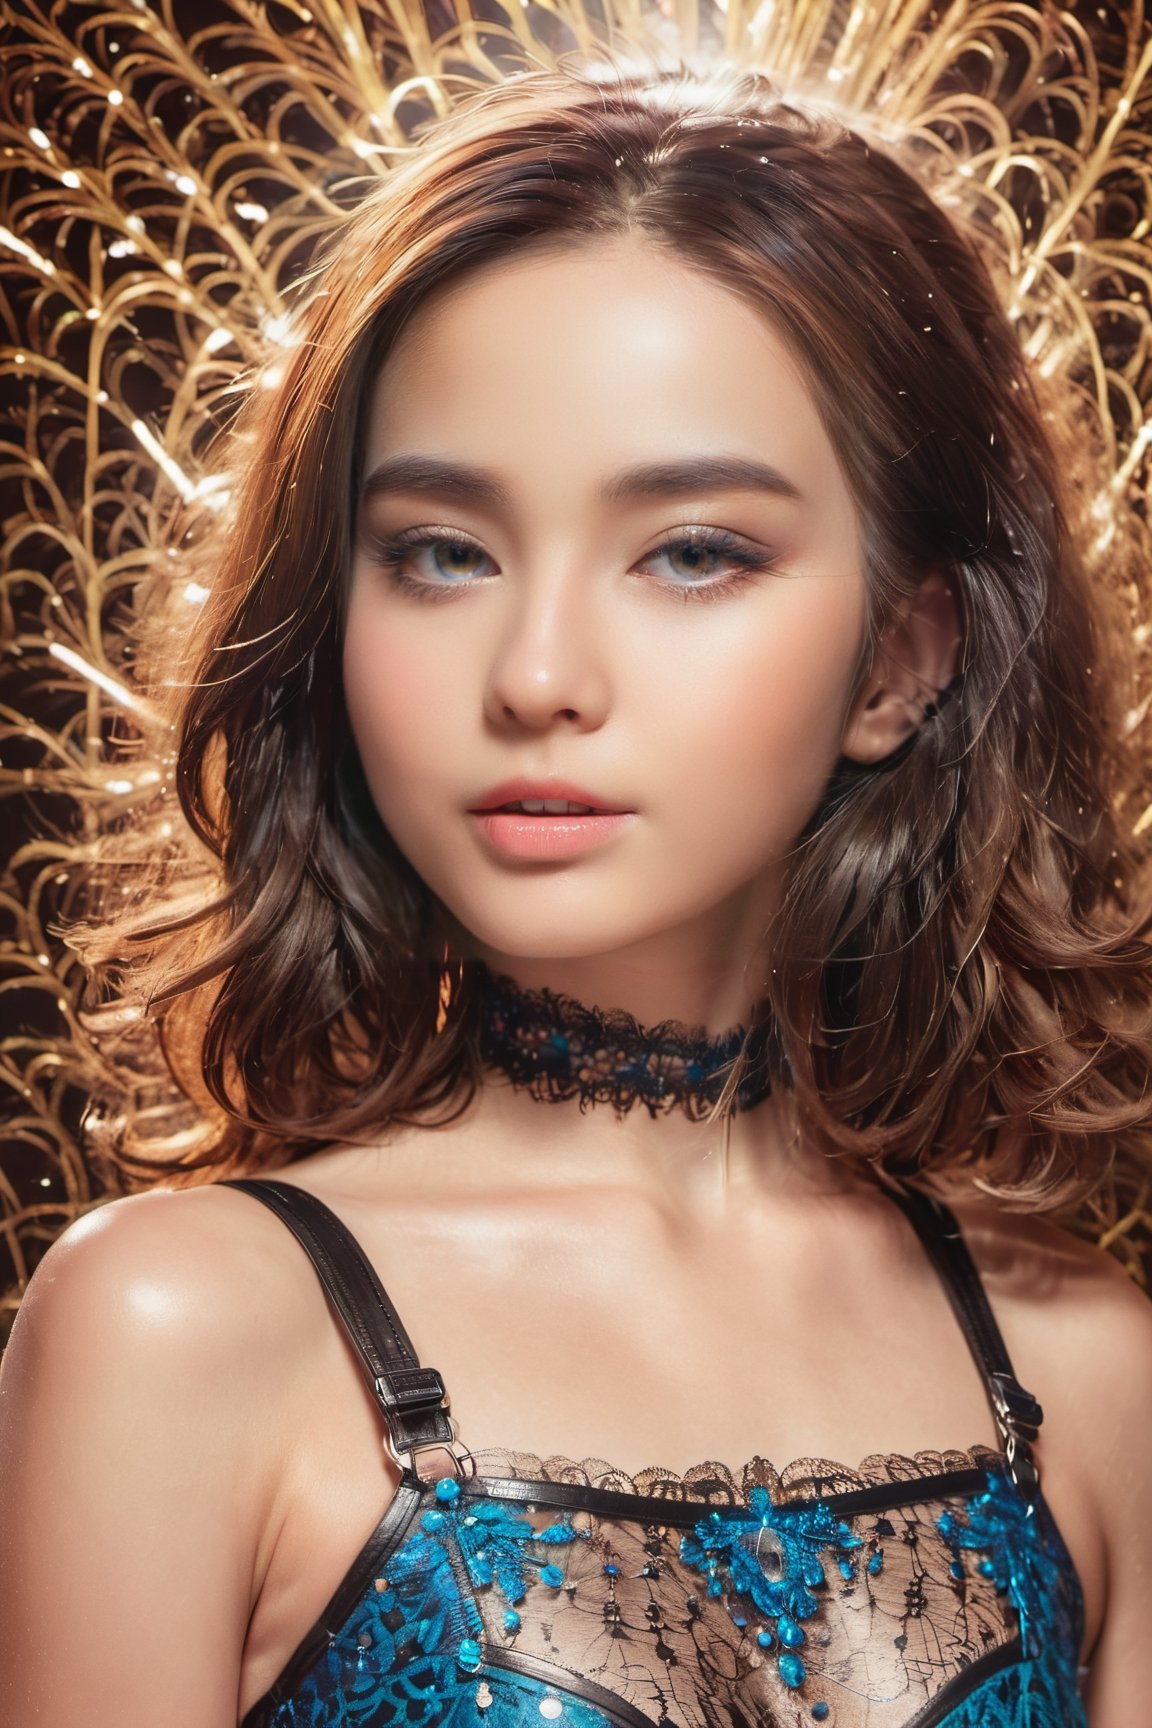 (glamour_photo:1.3) of a beautiful young model\(woman, girl\), (preteen:1.4), 1girl, (blush:0.5), (goosebumps, blemishes:0.5), subsurface scattering, detailed skin texture, textured skin, realistic dull skin noise, visible skin detail, skin fuzz, dry skin, perfect fingers & hands, realistic fingernails, feminine tone, absolute_cleavage, BREAK wearing Sheer lace bodysuit and high-waisted faux leather shorts, exposed_navel, BREAK RAW Photo, (photorealistic, photorealism, realistic:1.3), SFW, (upper_body framing from hips:1.6), Sexy_Pose, (New_Year:1.4), shot on ALEXA 65 camera, using Fujicolor Pro Film, Enhanced All,